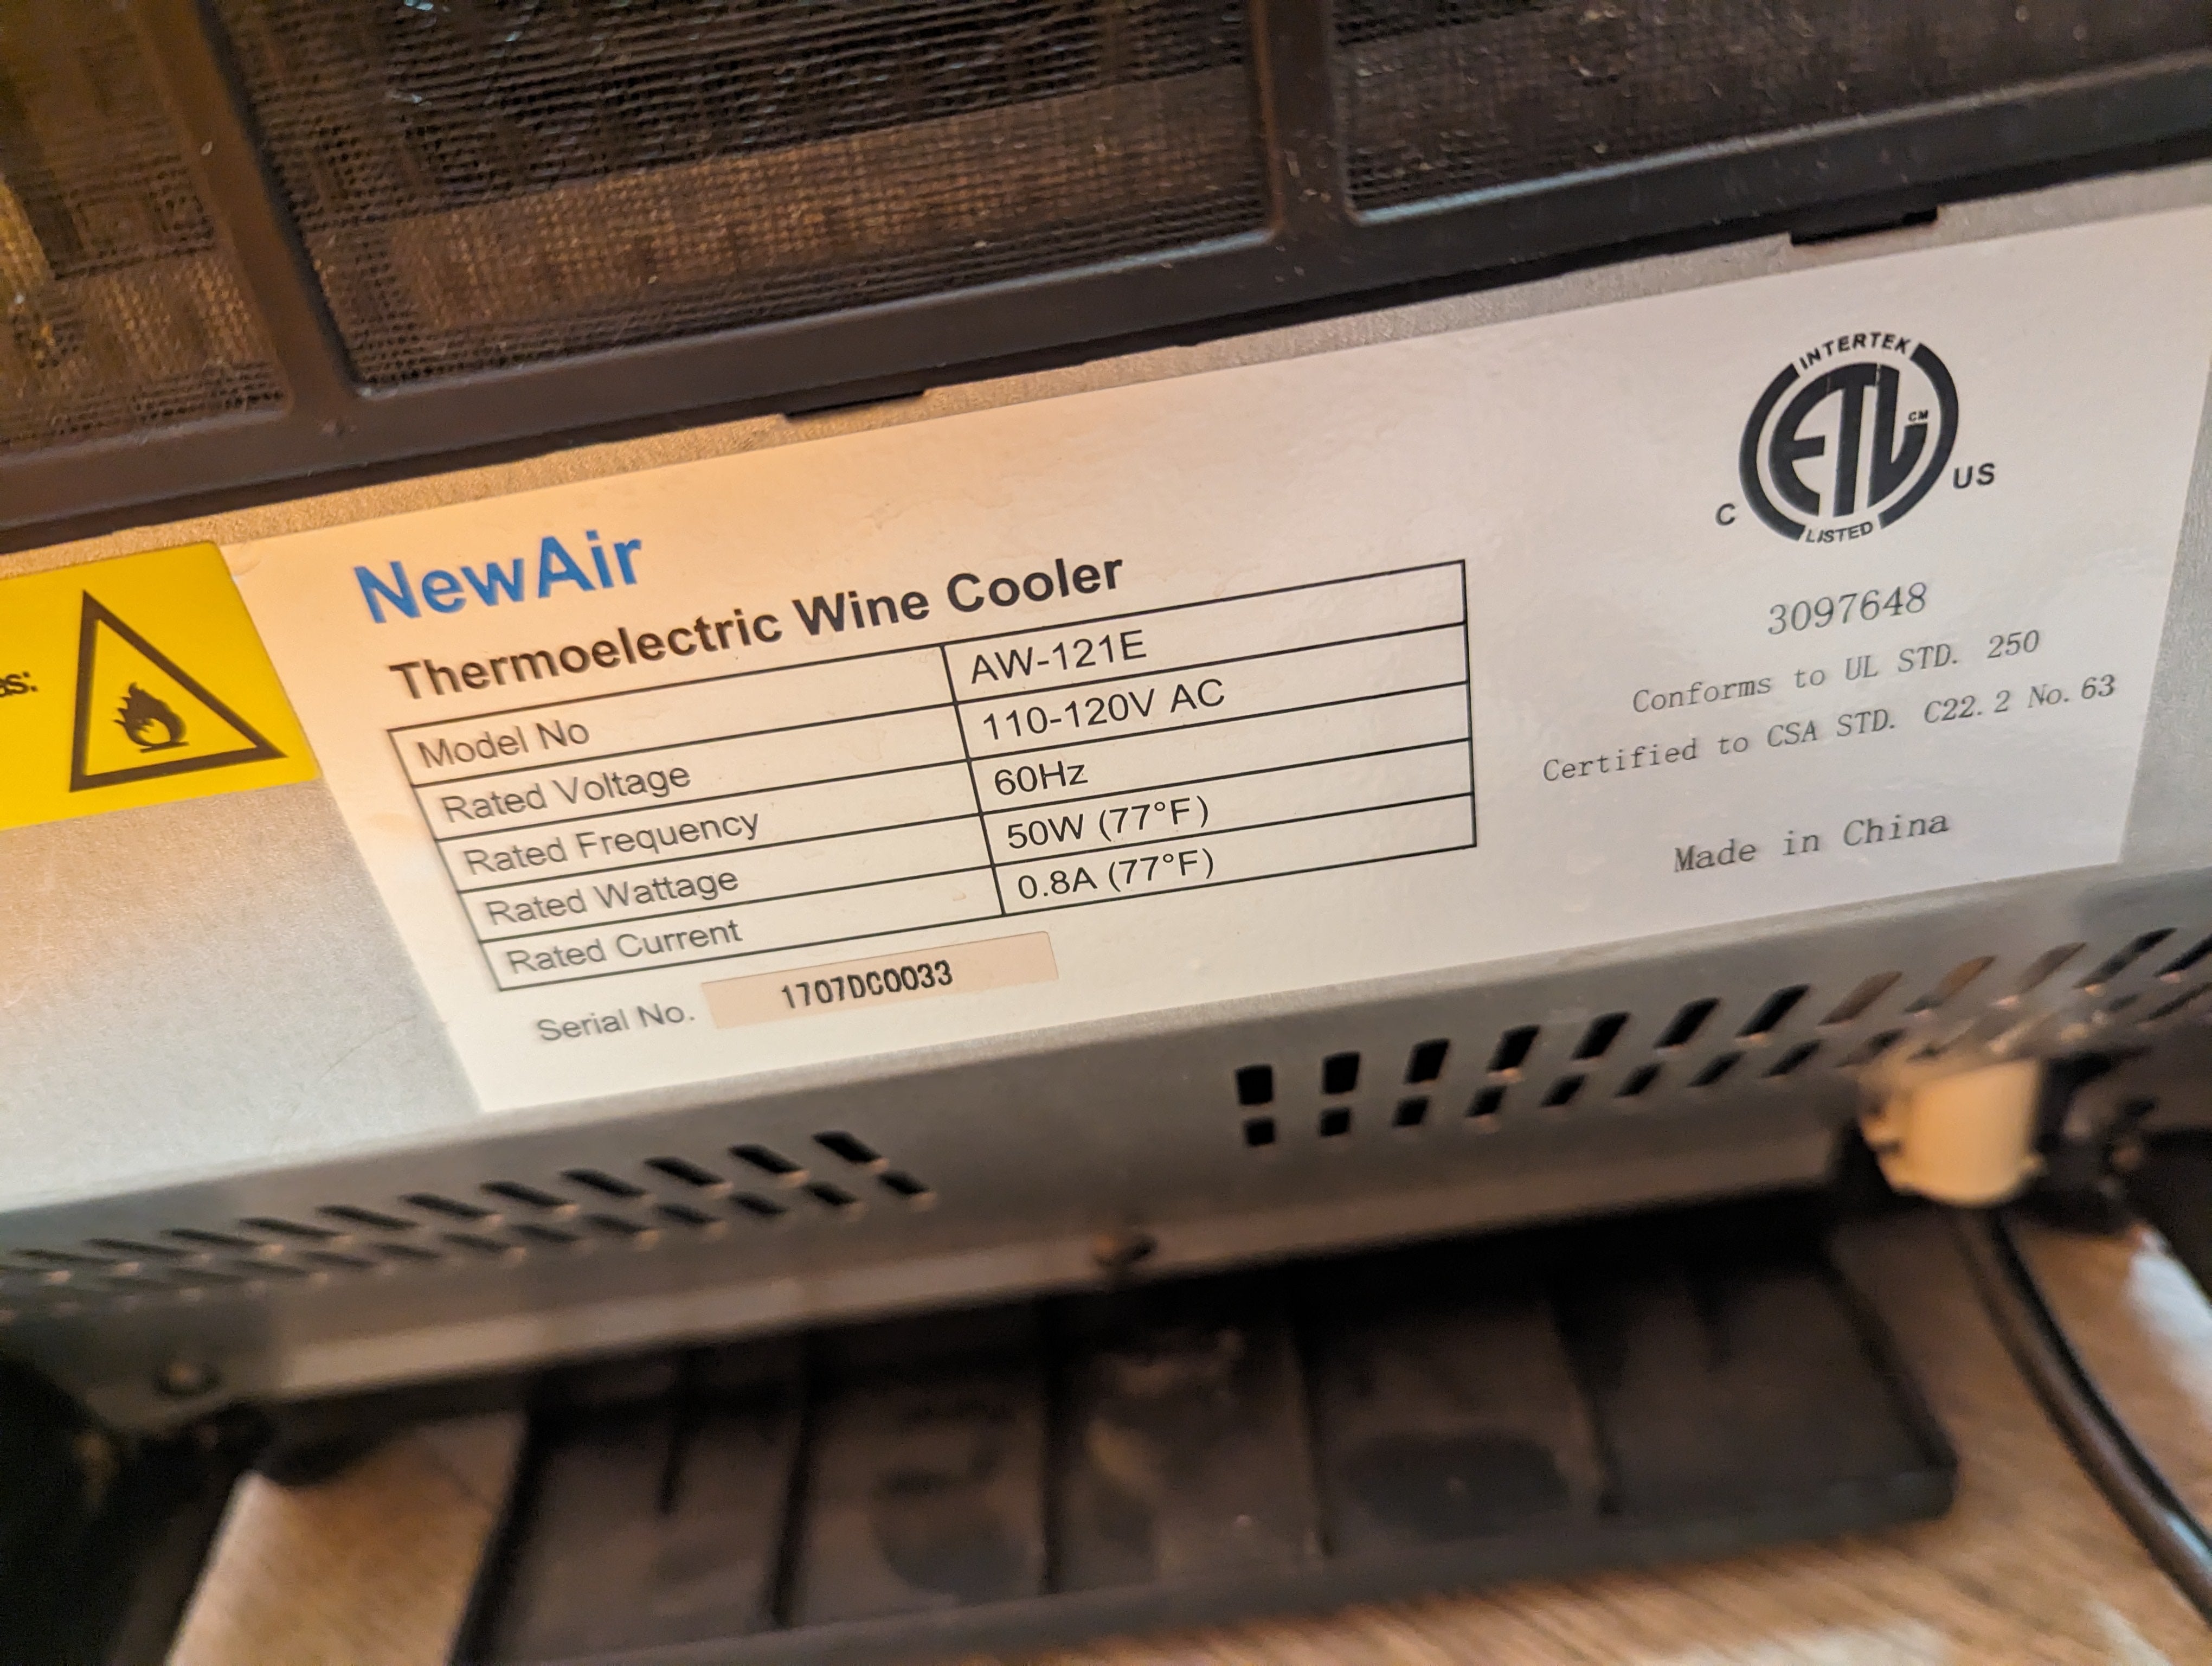 NewAir AW-121E Thermoelectric Wine Cooler